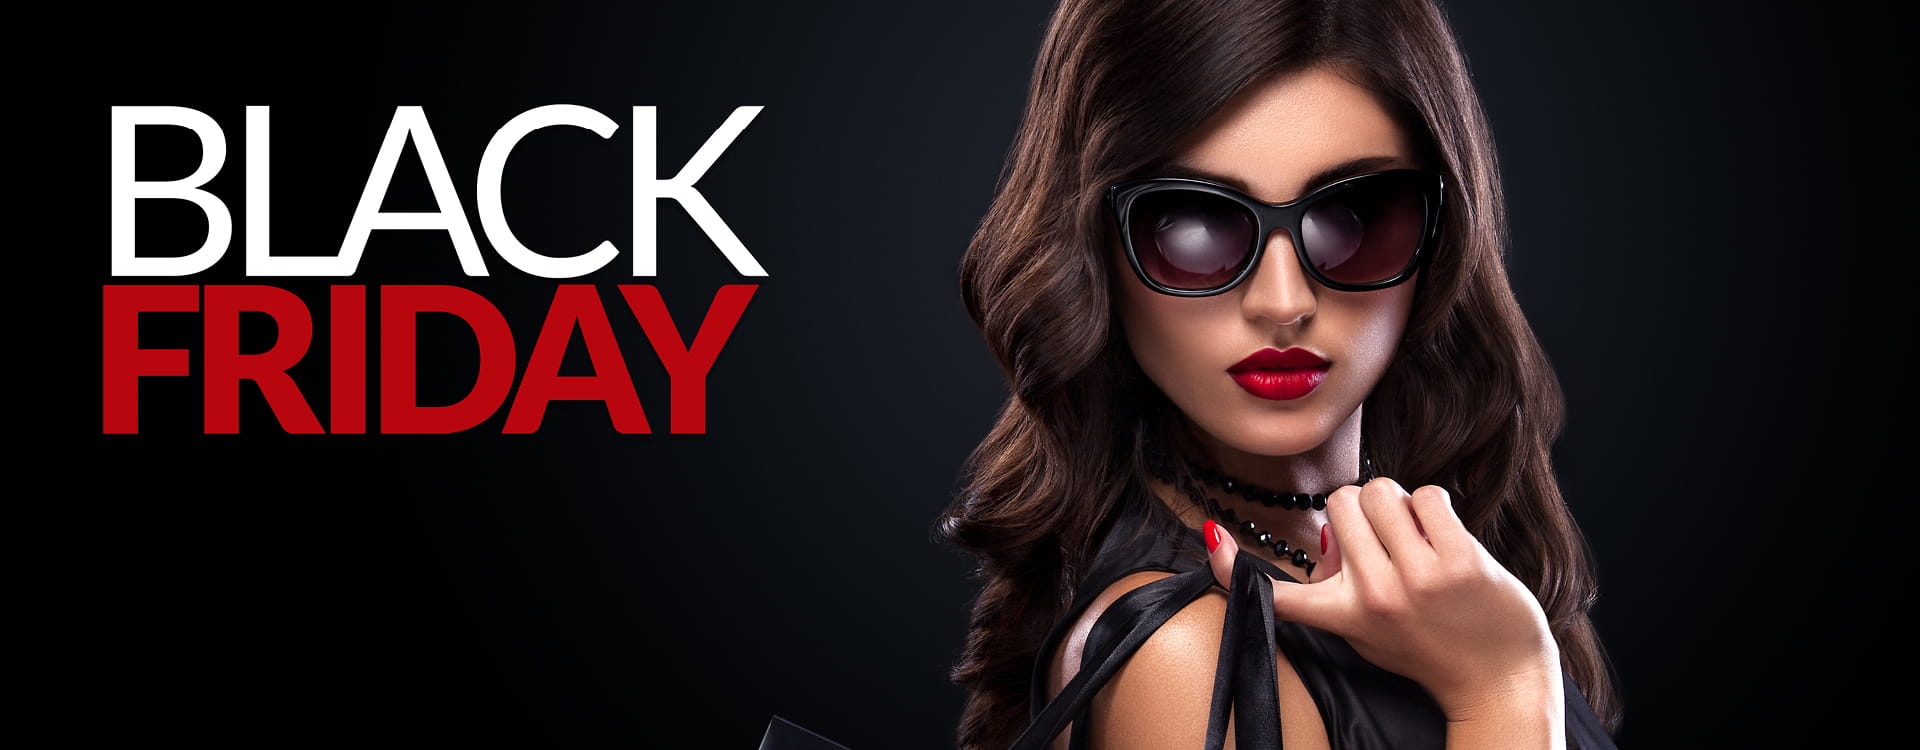 black_friday_1920x750-2pTeZZgs